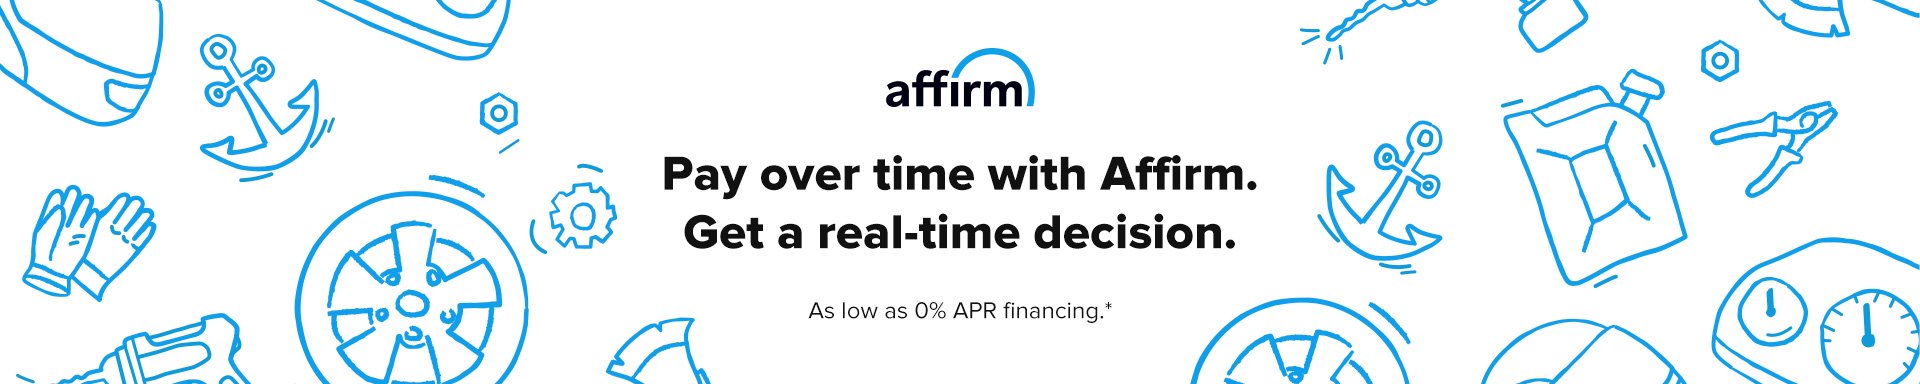 Affirm | Easy Financing | Pay Later with Affirm - RECREATIONiD.com